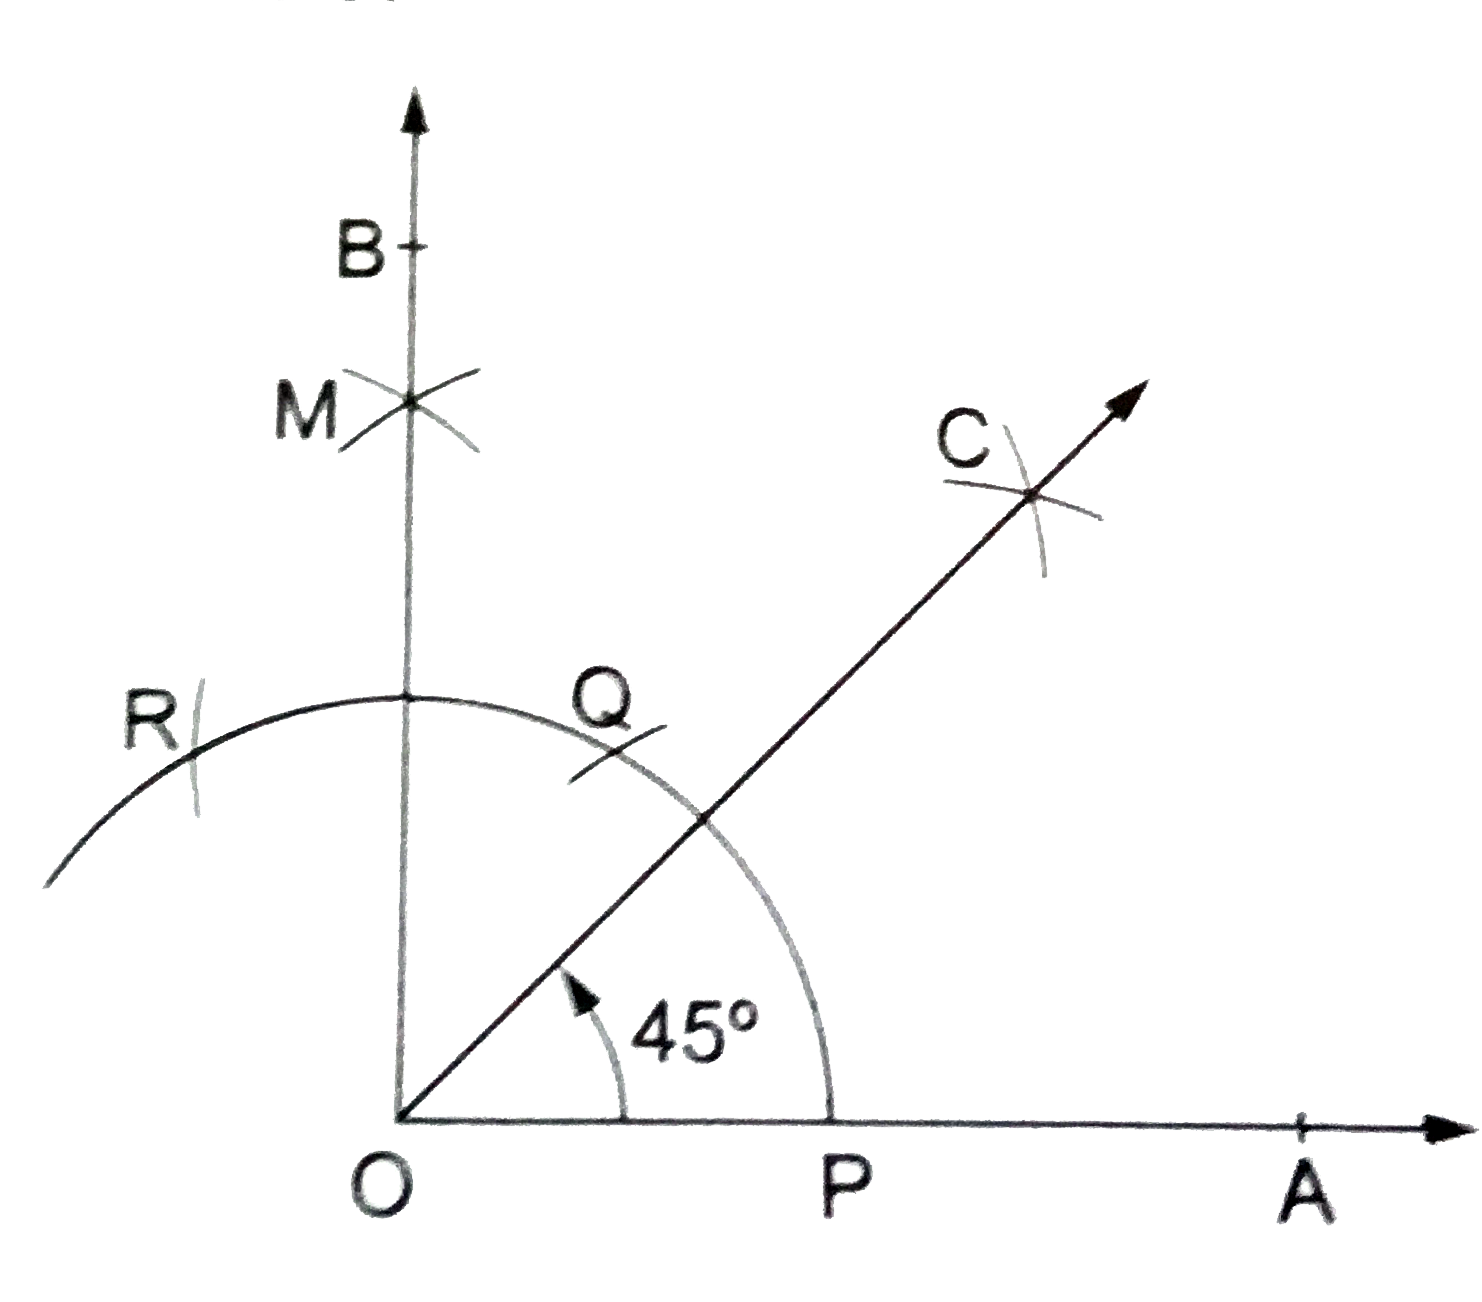 How to construct (draw) a 45 degree angle with compass and